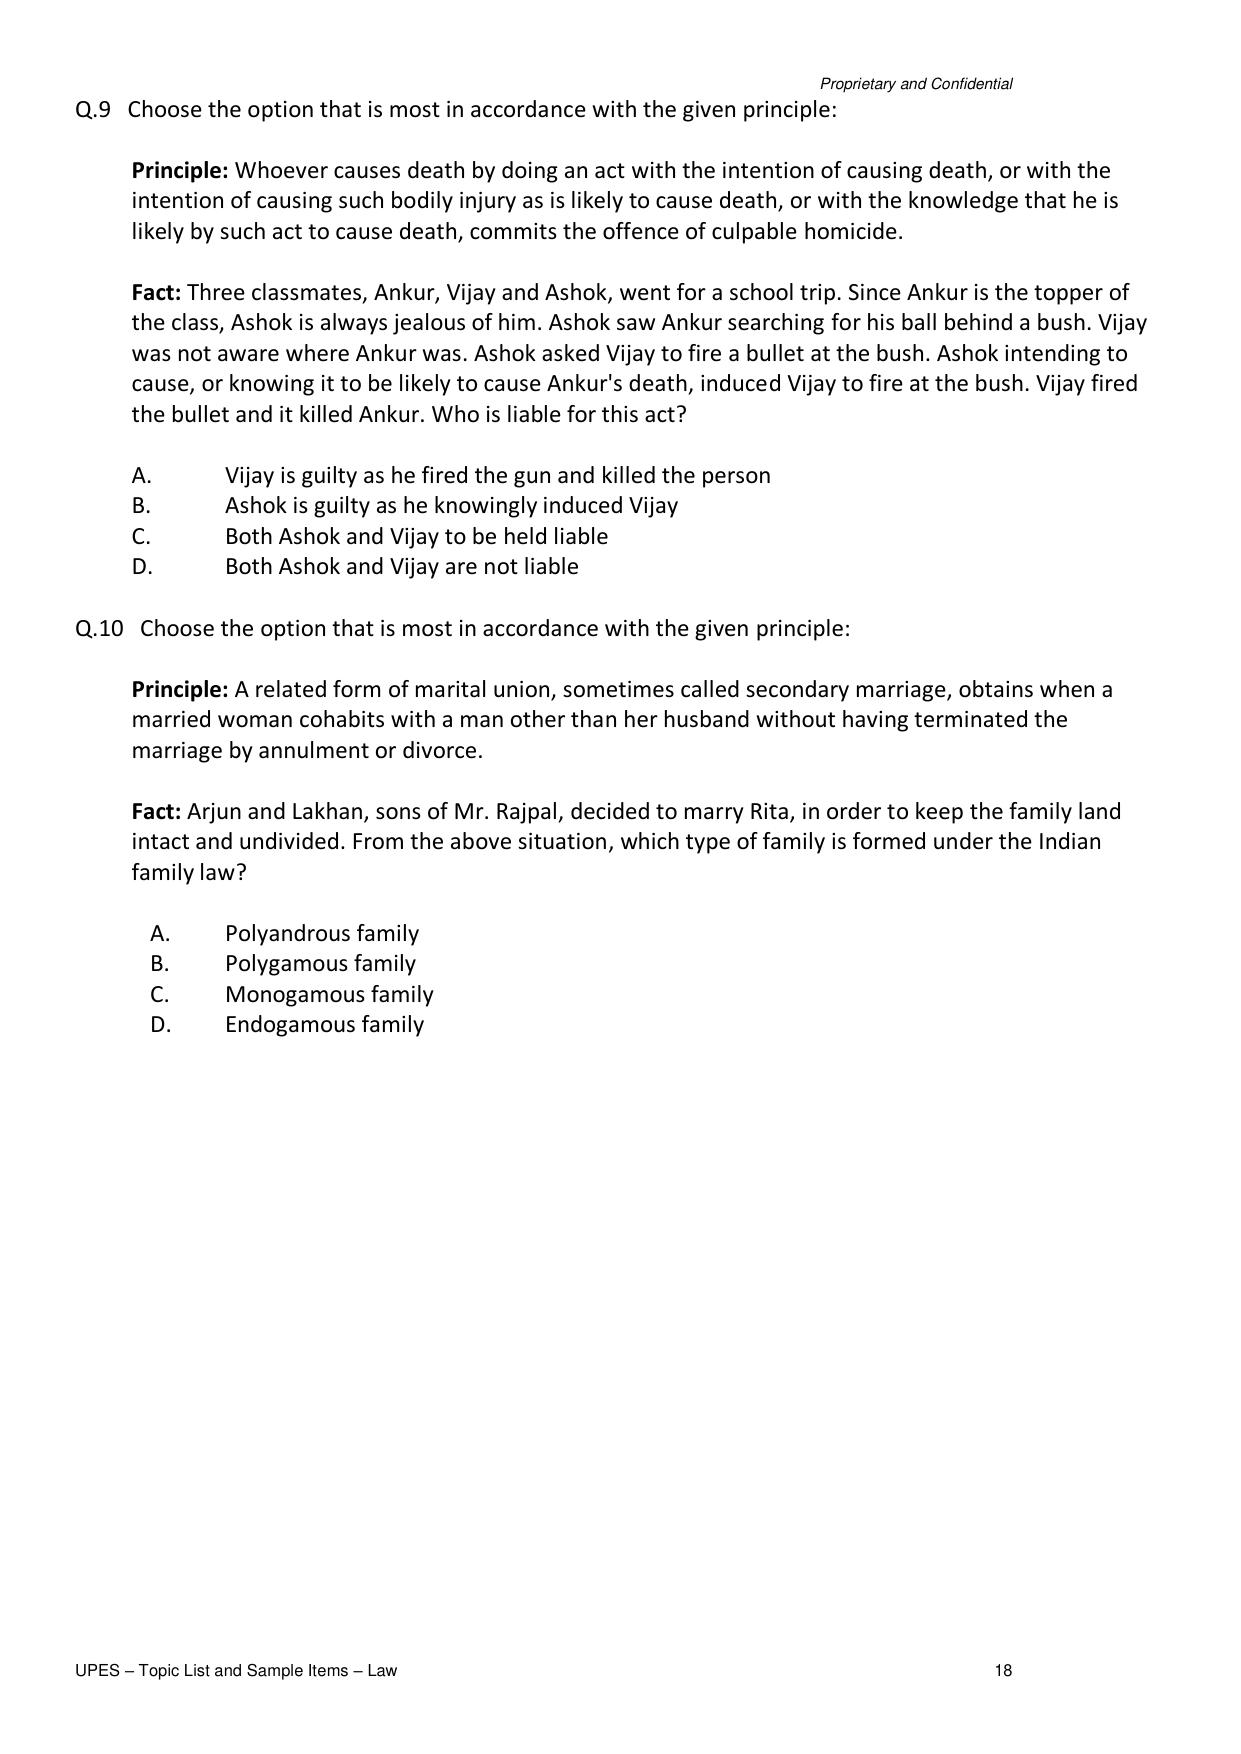 UPES Law Sample Papers - Page 18